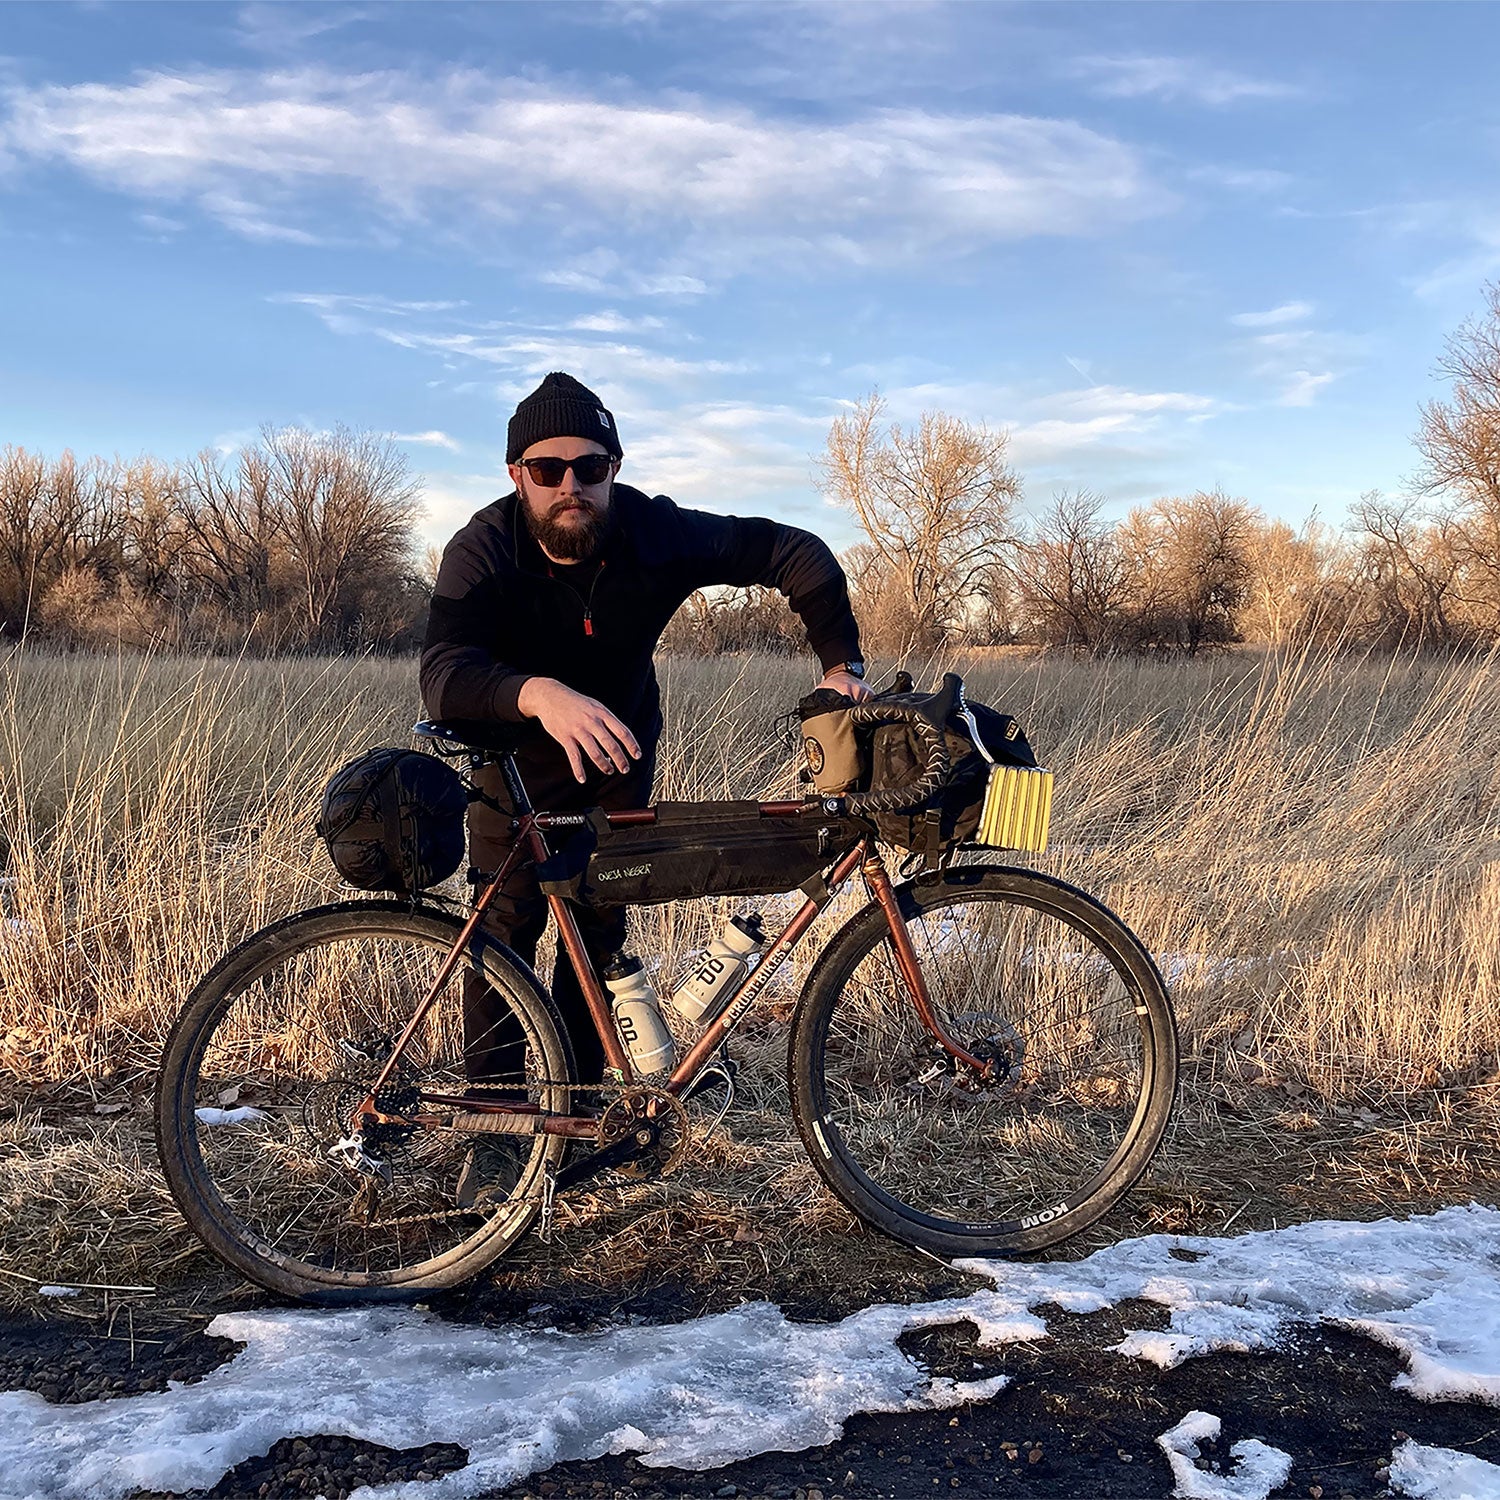 How to Have Fun Winter Bike Camping